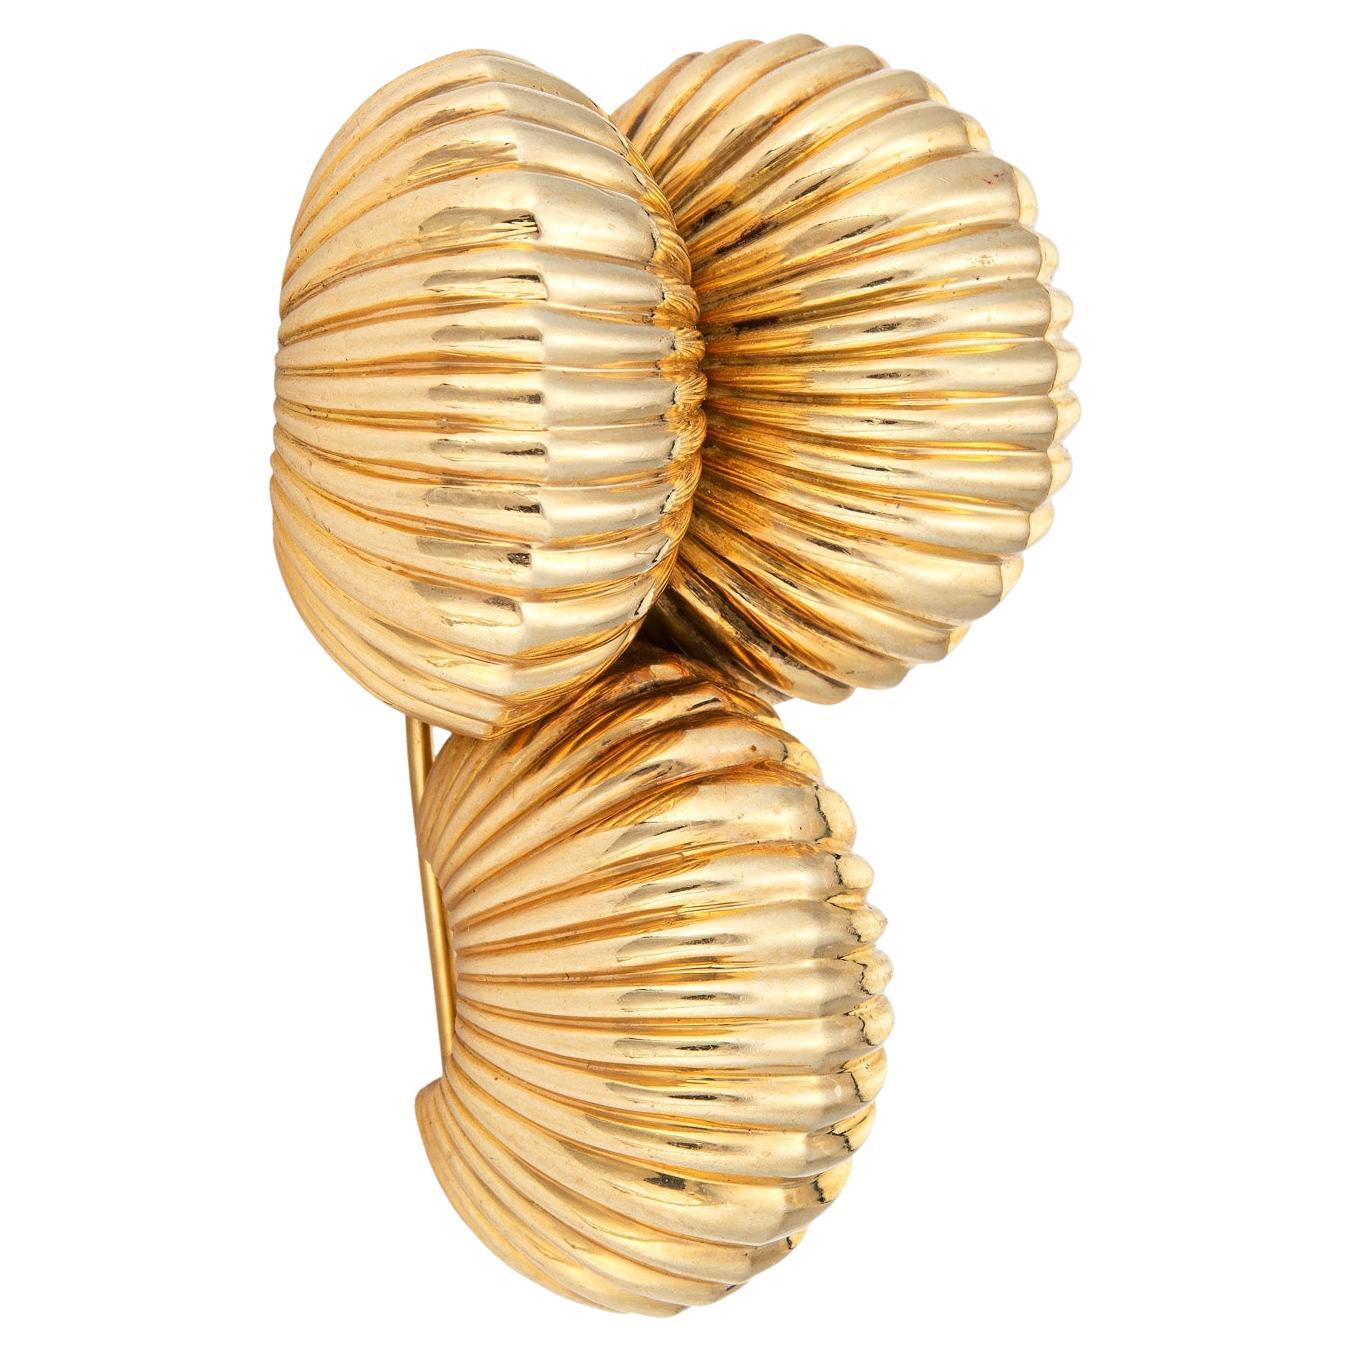 Vintage Cartier Brooch c1945 Bombe Fluted Dome Pin 14k Gold Shell Jewelry For Sale